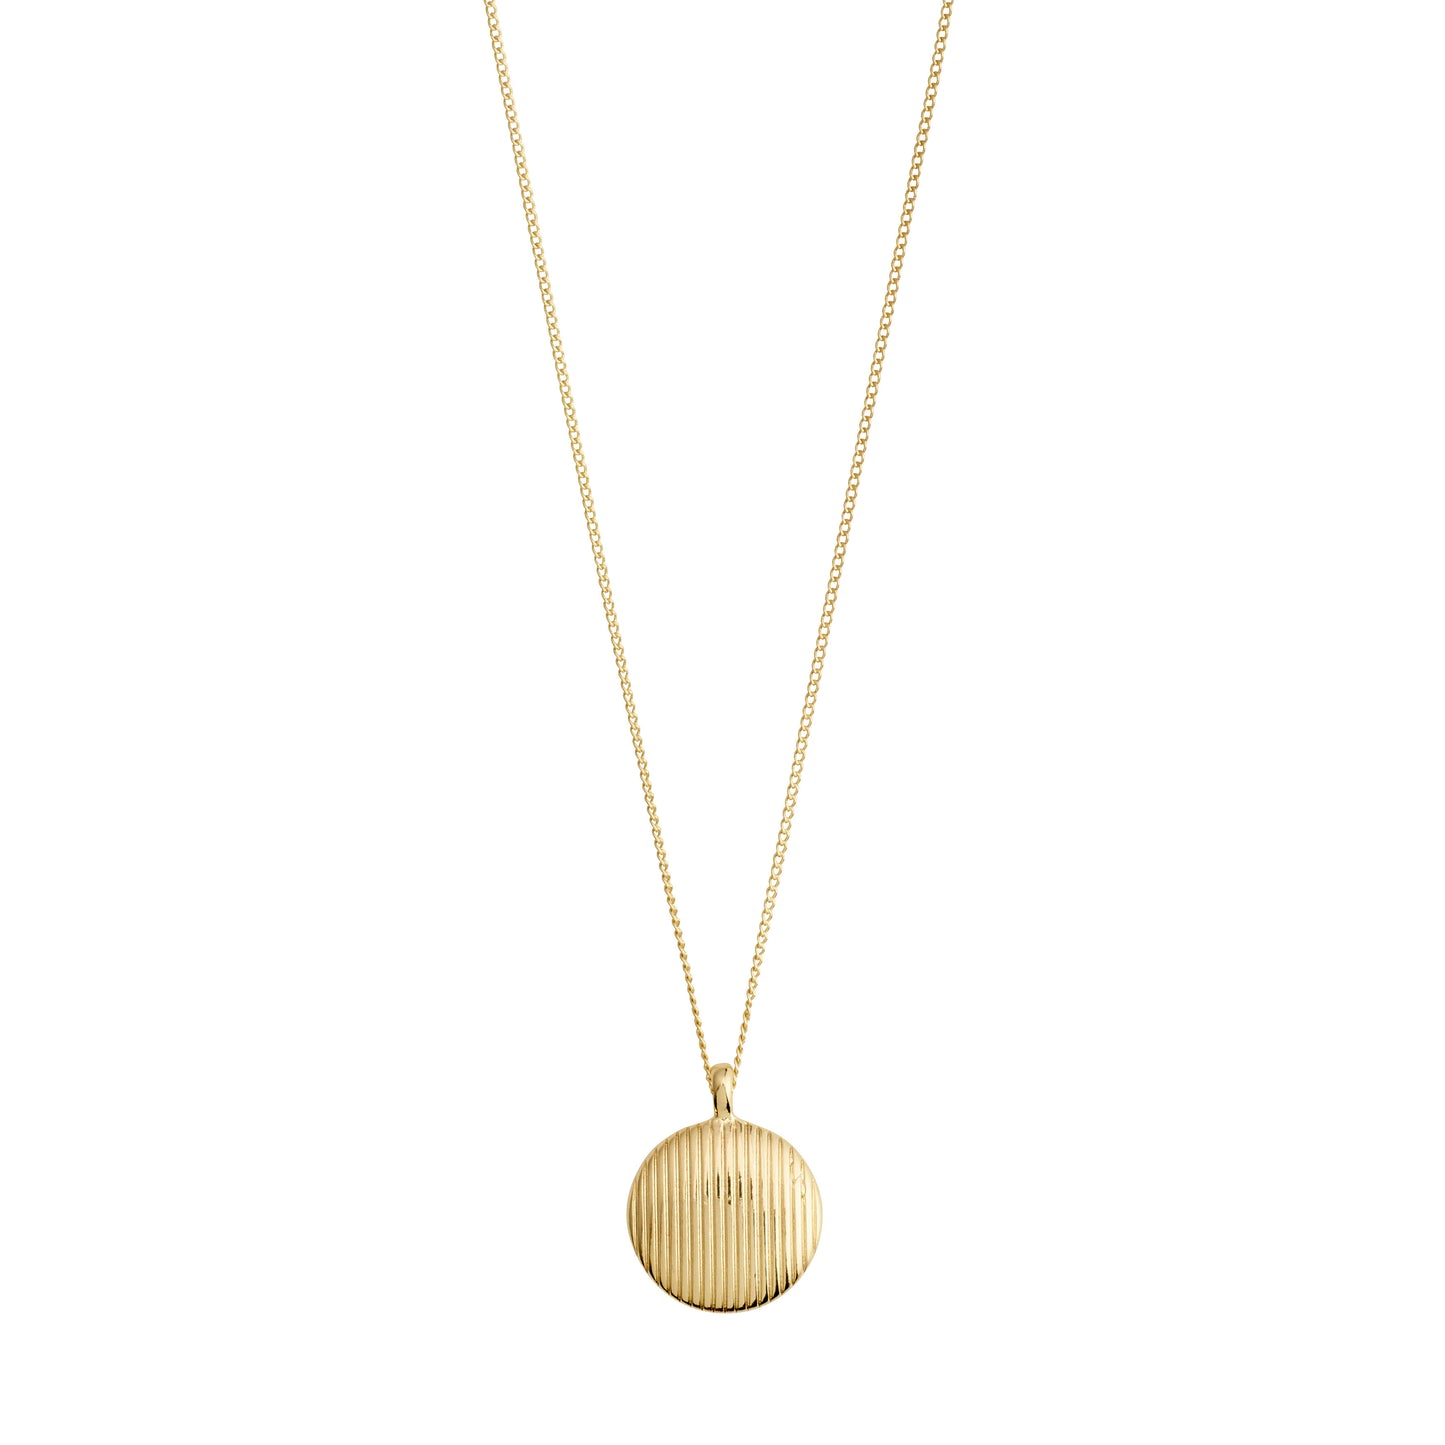 XENA recycled coin necklace gold-plated